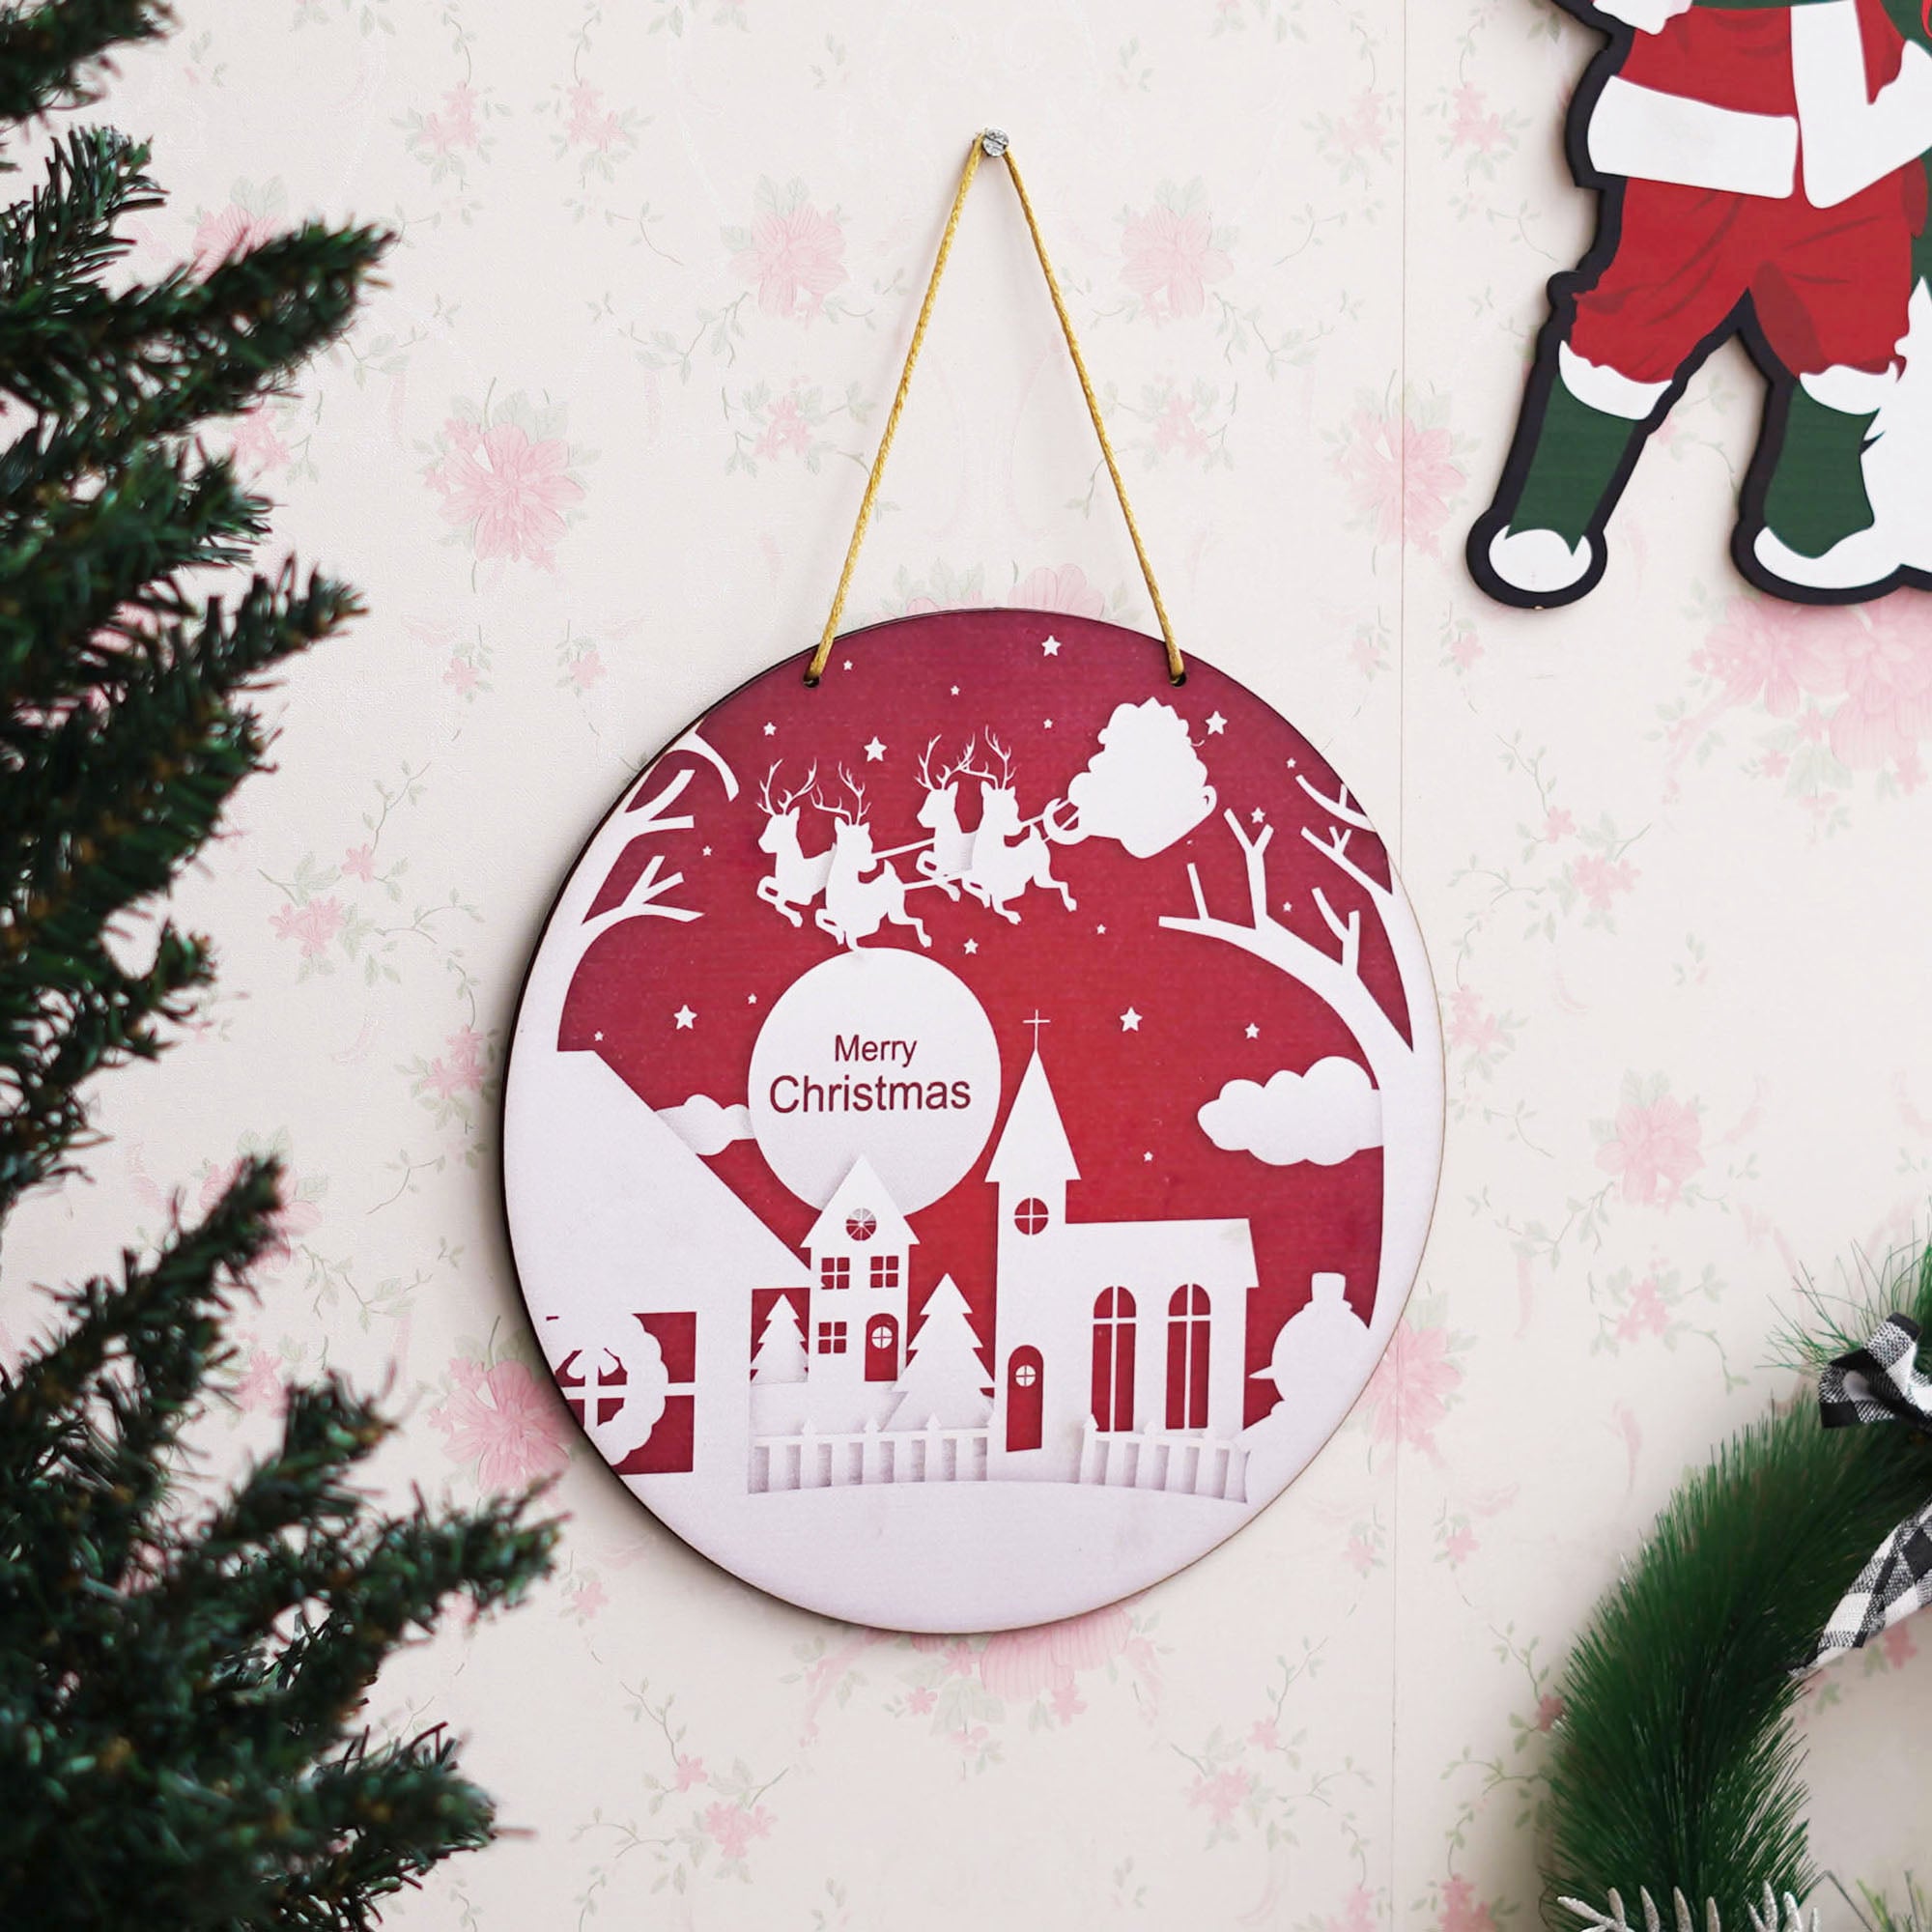 eCraftIndia Merry Christmas and Santa Claus with sleigh and reindeer Printed Door Wall Hanging for Home and Christmas Decoration (Red, White) 4